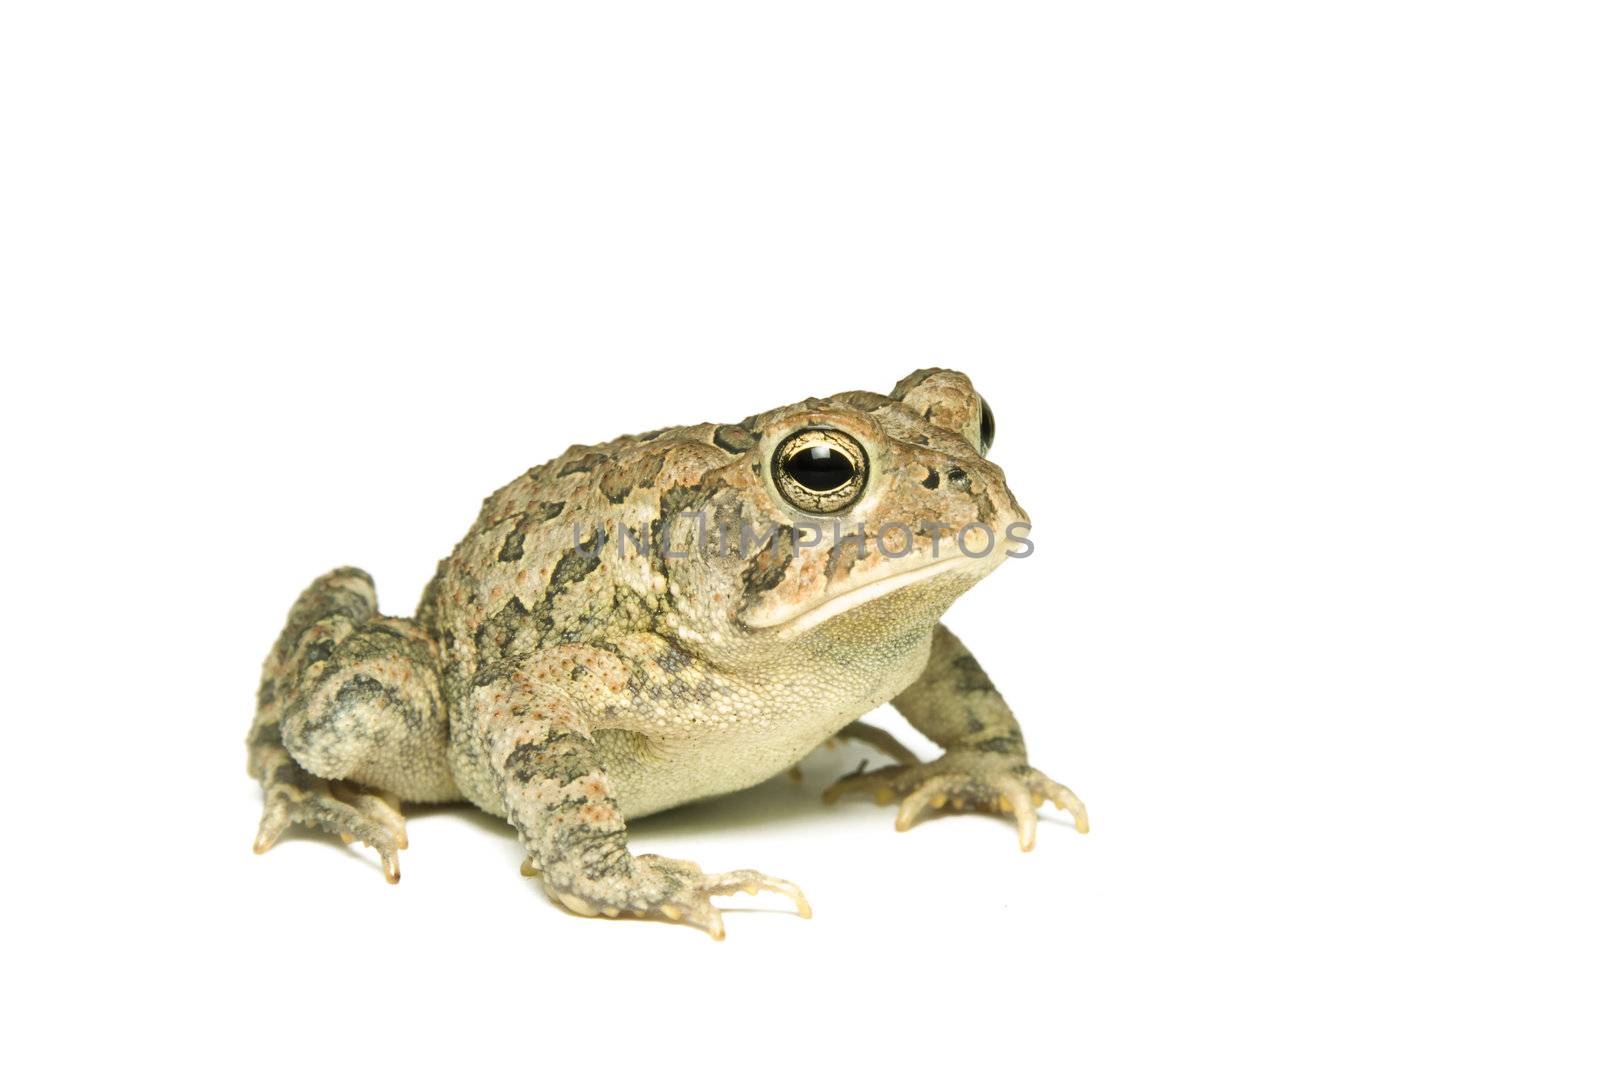 Southern Toad (Bufo terrestris) Isolated on a white background